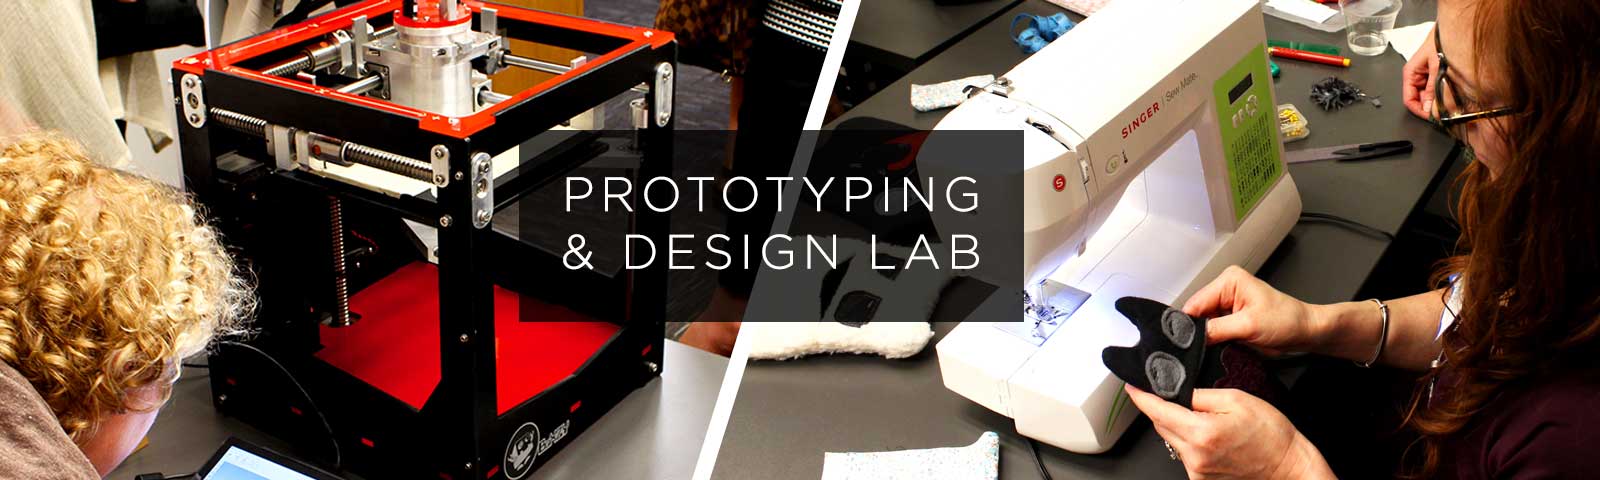 Upcoming Events from the Prototyping & Design Lab